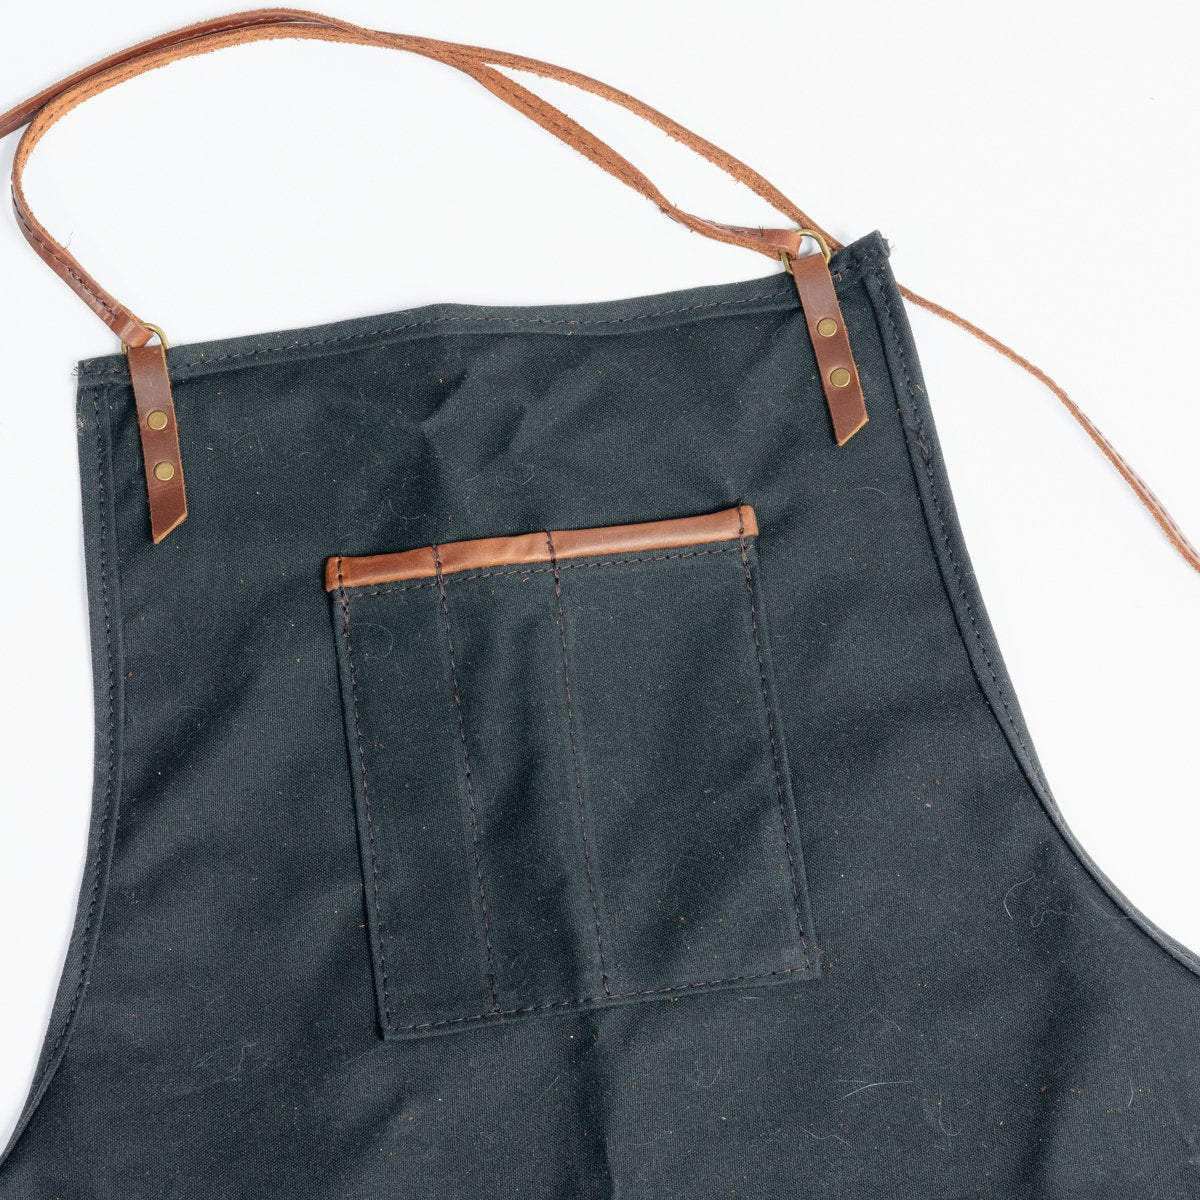 Waxed Canvas Apron Made in USA – Rustico